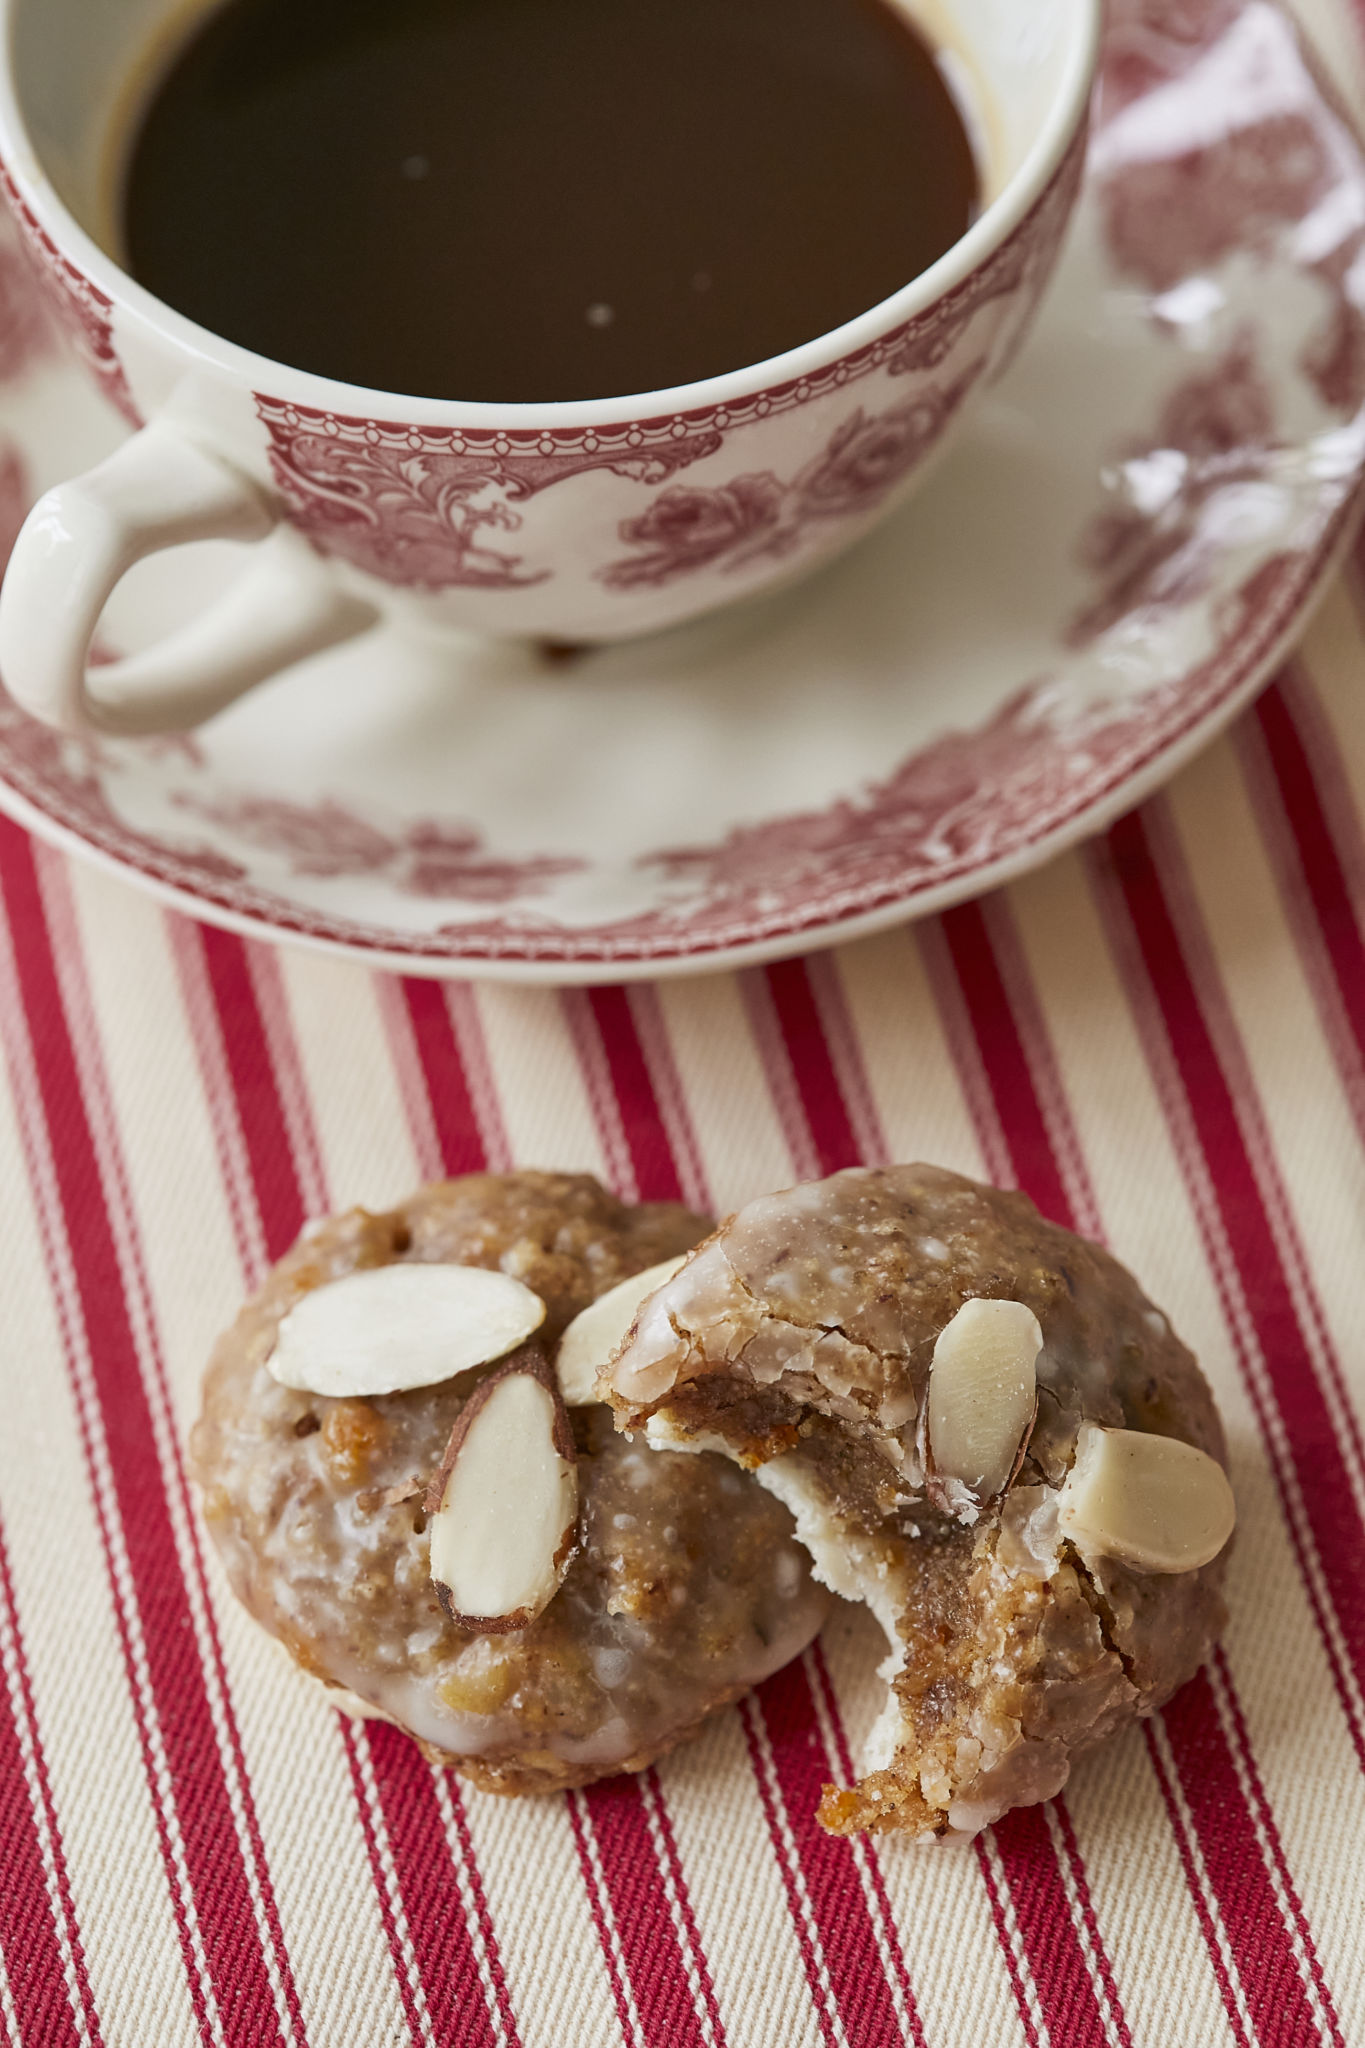 A Lebkuchen with a bite taken out of it show the different layers and textures of the cookie. On the bottom of the Lebkuchen is a edible paper wafter, the cookie itself looks chewy and packed with nuts, and the top is covered in a homemade glaze and slivered almonds. The two cookies are next to a tea cup with coffee on a red and white striped table cloth. 